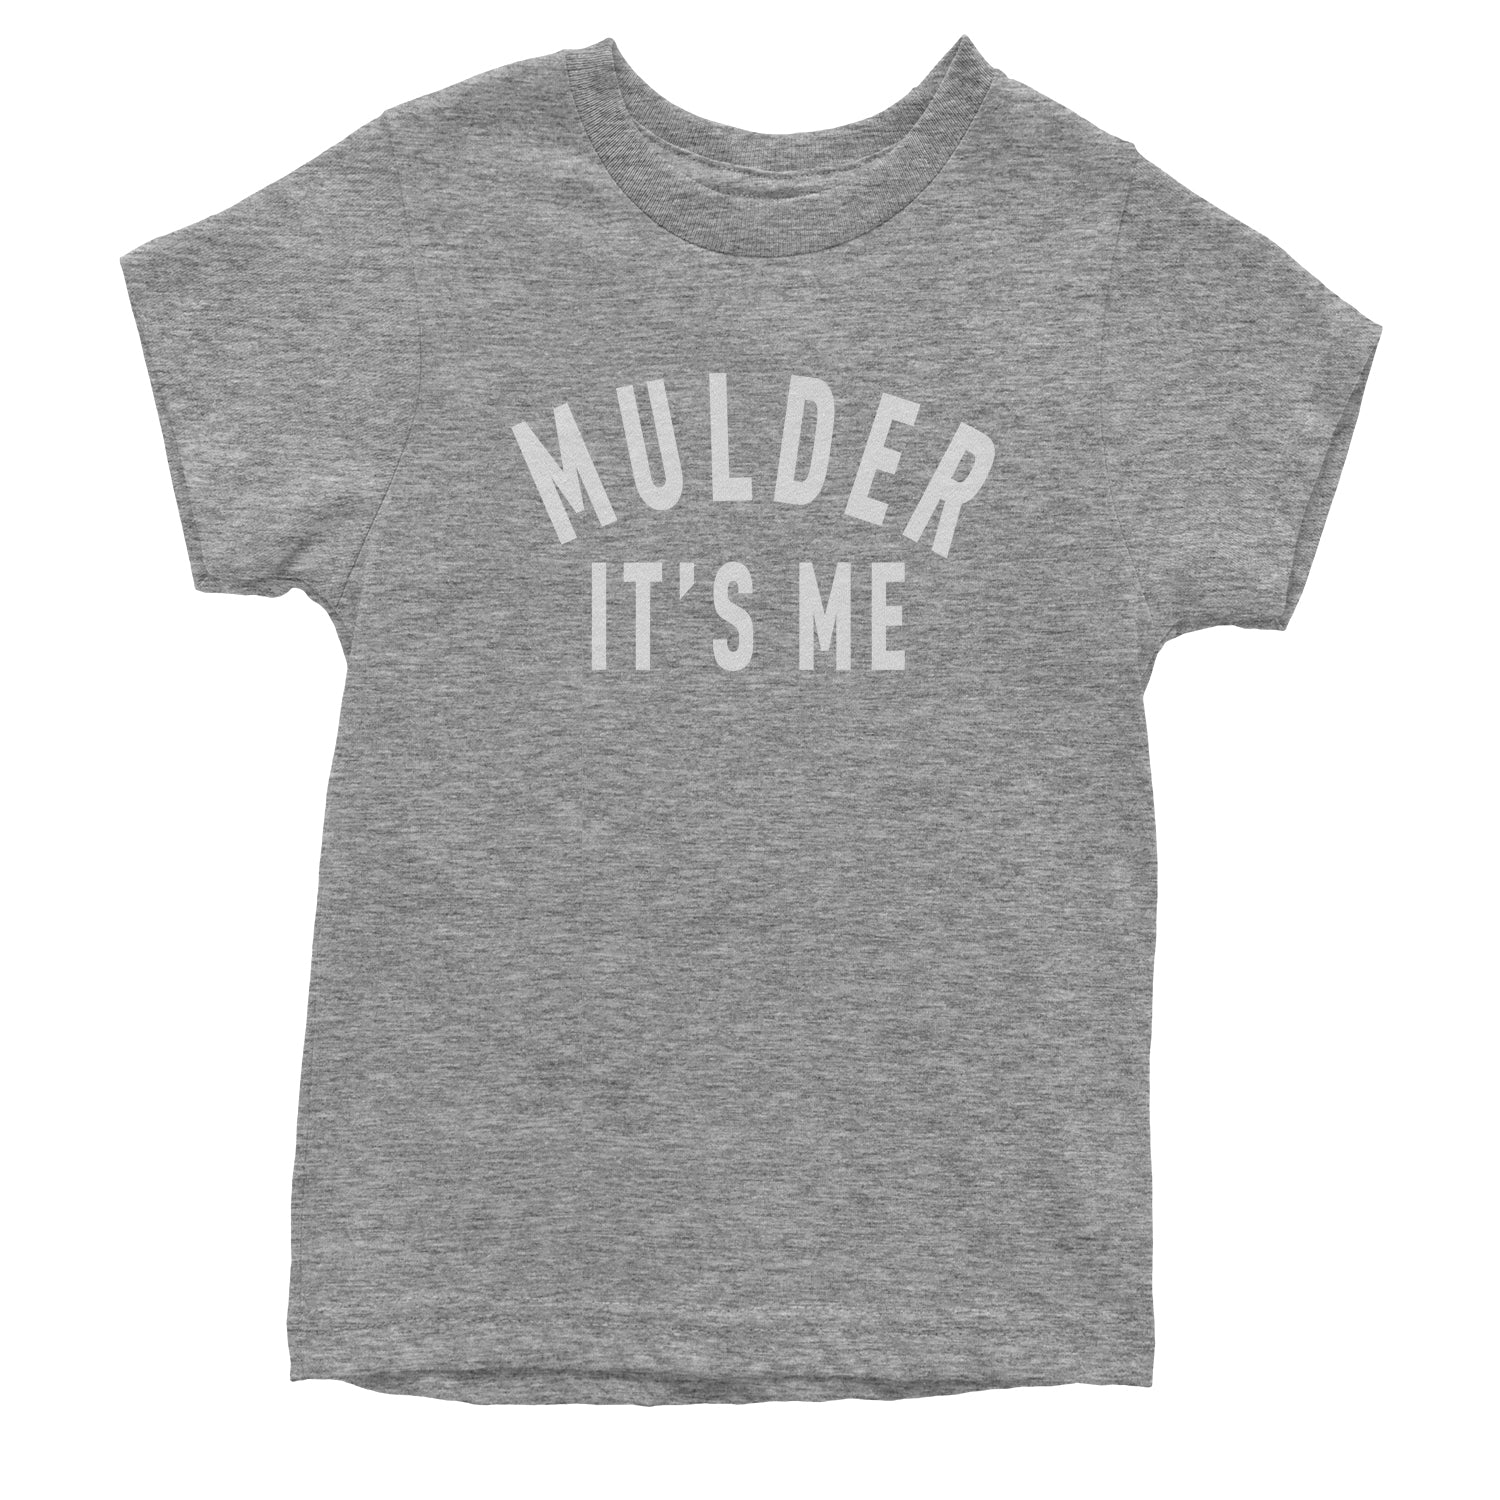 Mulder, It's Me Youth T-shirt 51, area, believe, files, is, mulder, out, scully, the, there, truth, x, xfiles by Expression Tees